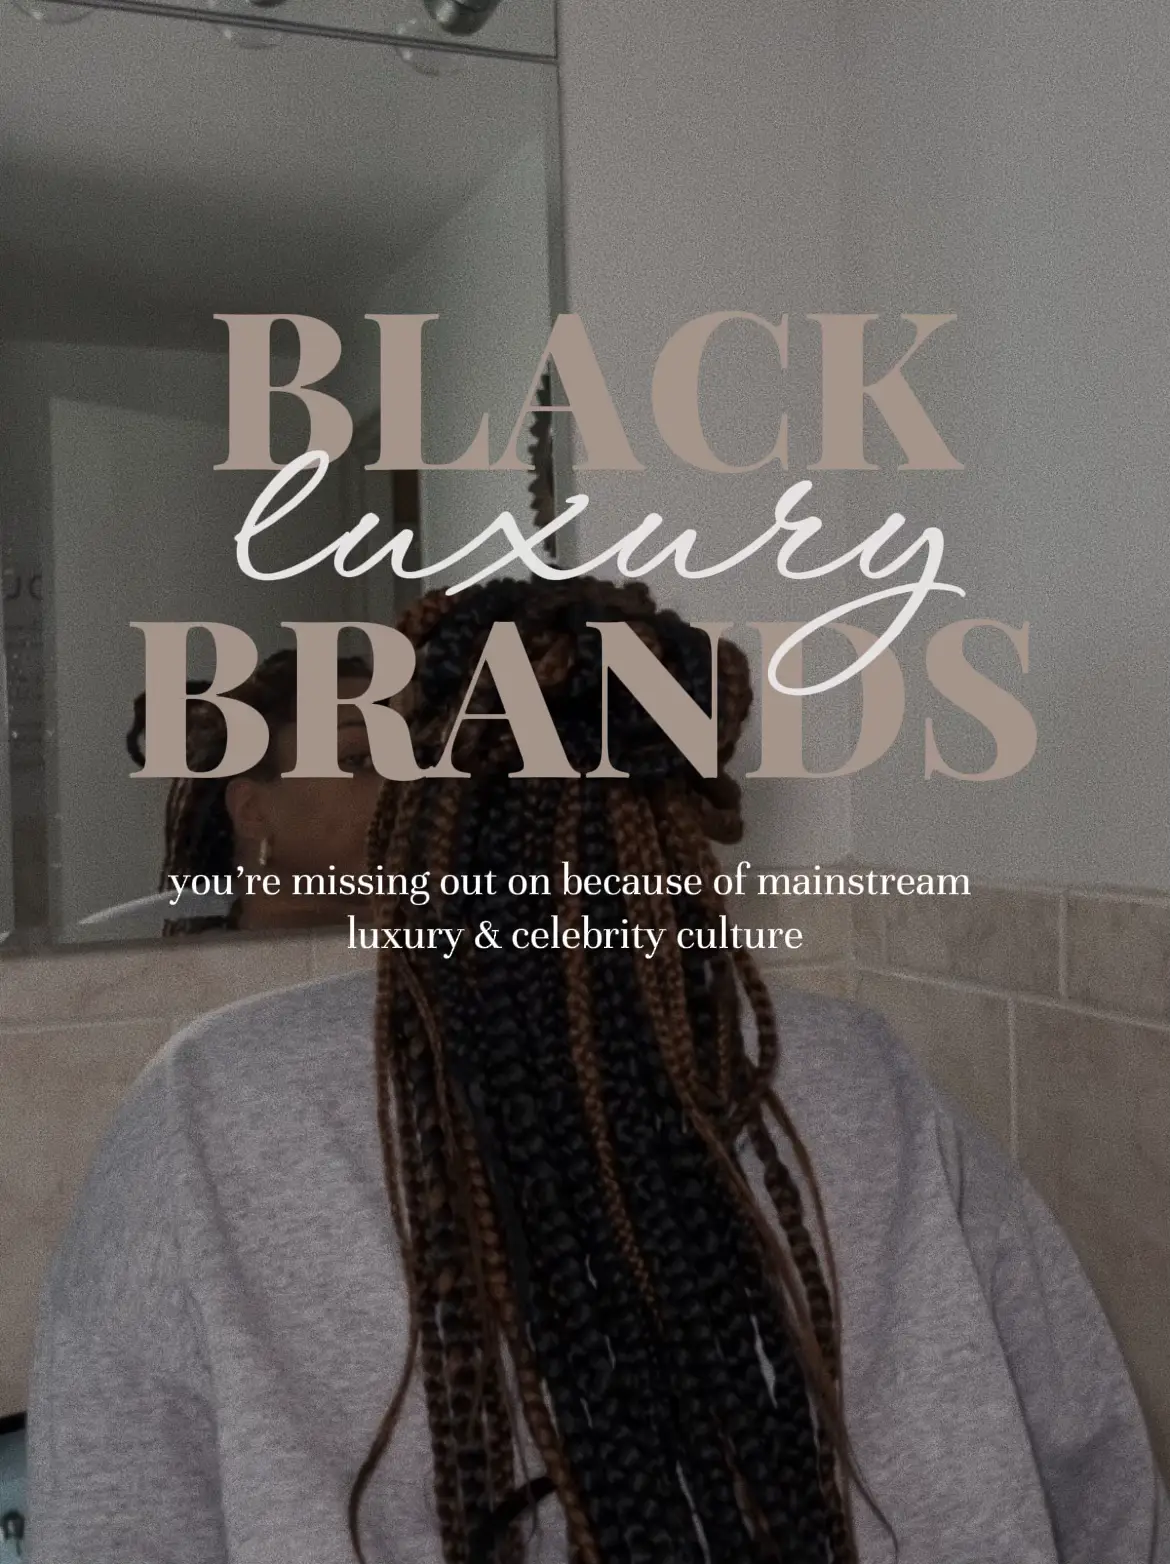 Black owned brands to shop!, Gallery posted by Kikeaj